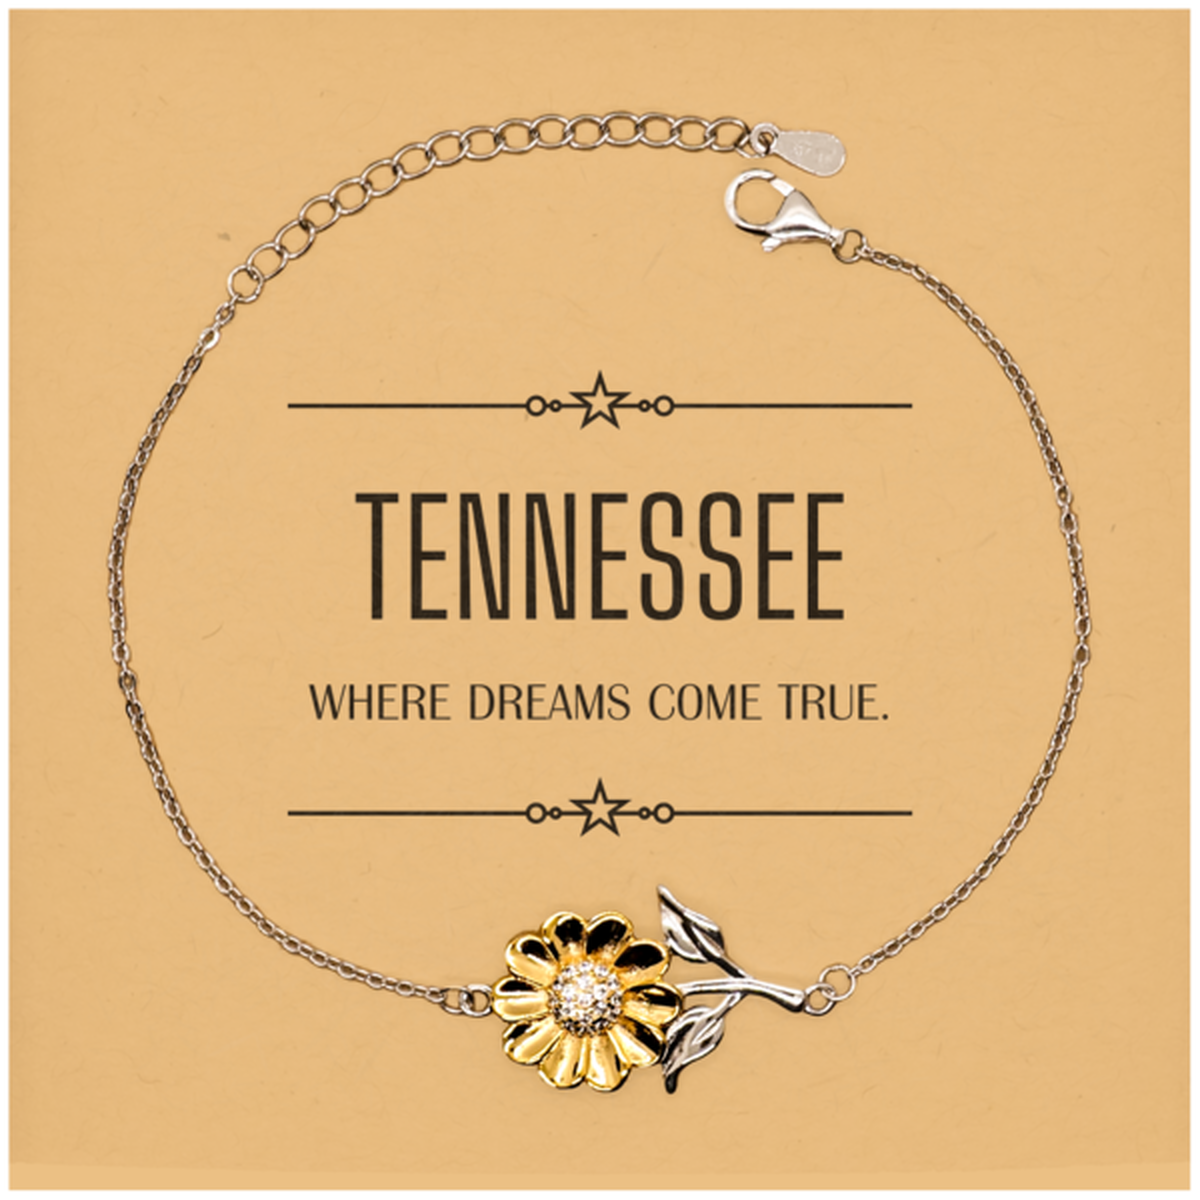 Love Tennessee State Sunflower Bracelet, Tennessee Where dreams come true, Birthday Christmas Inspirational Gifts For Tennessee Men, Women, Friends